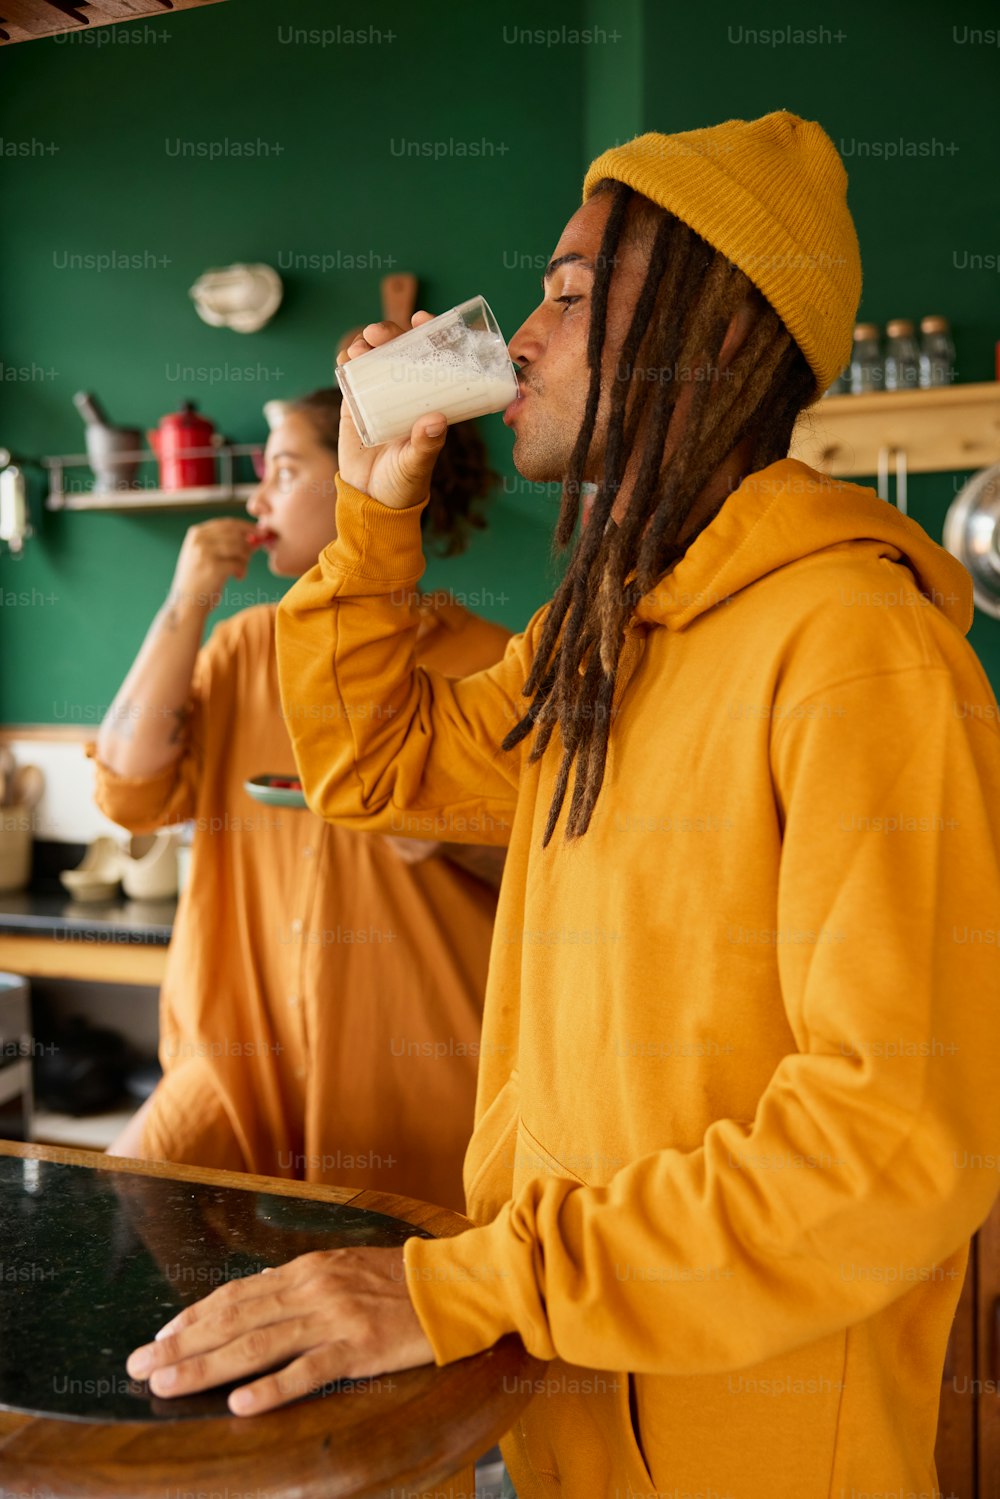 a man with dreadlocks drinking from a glass